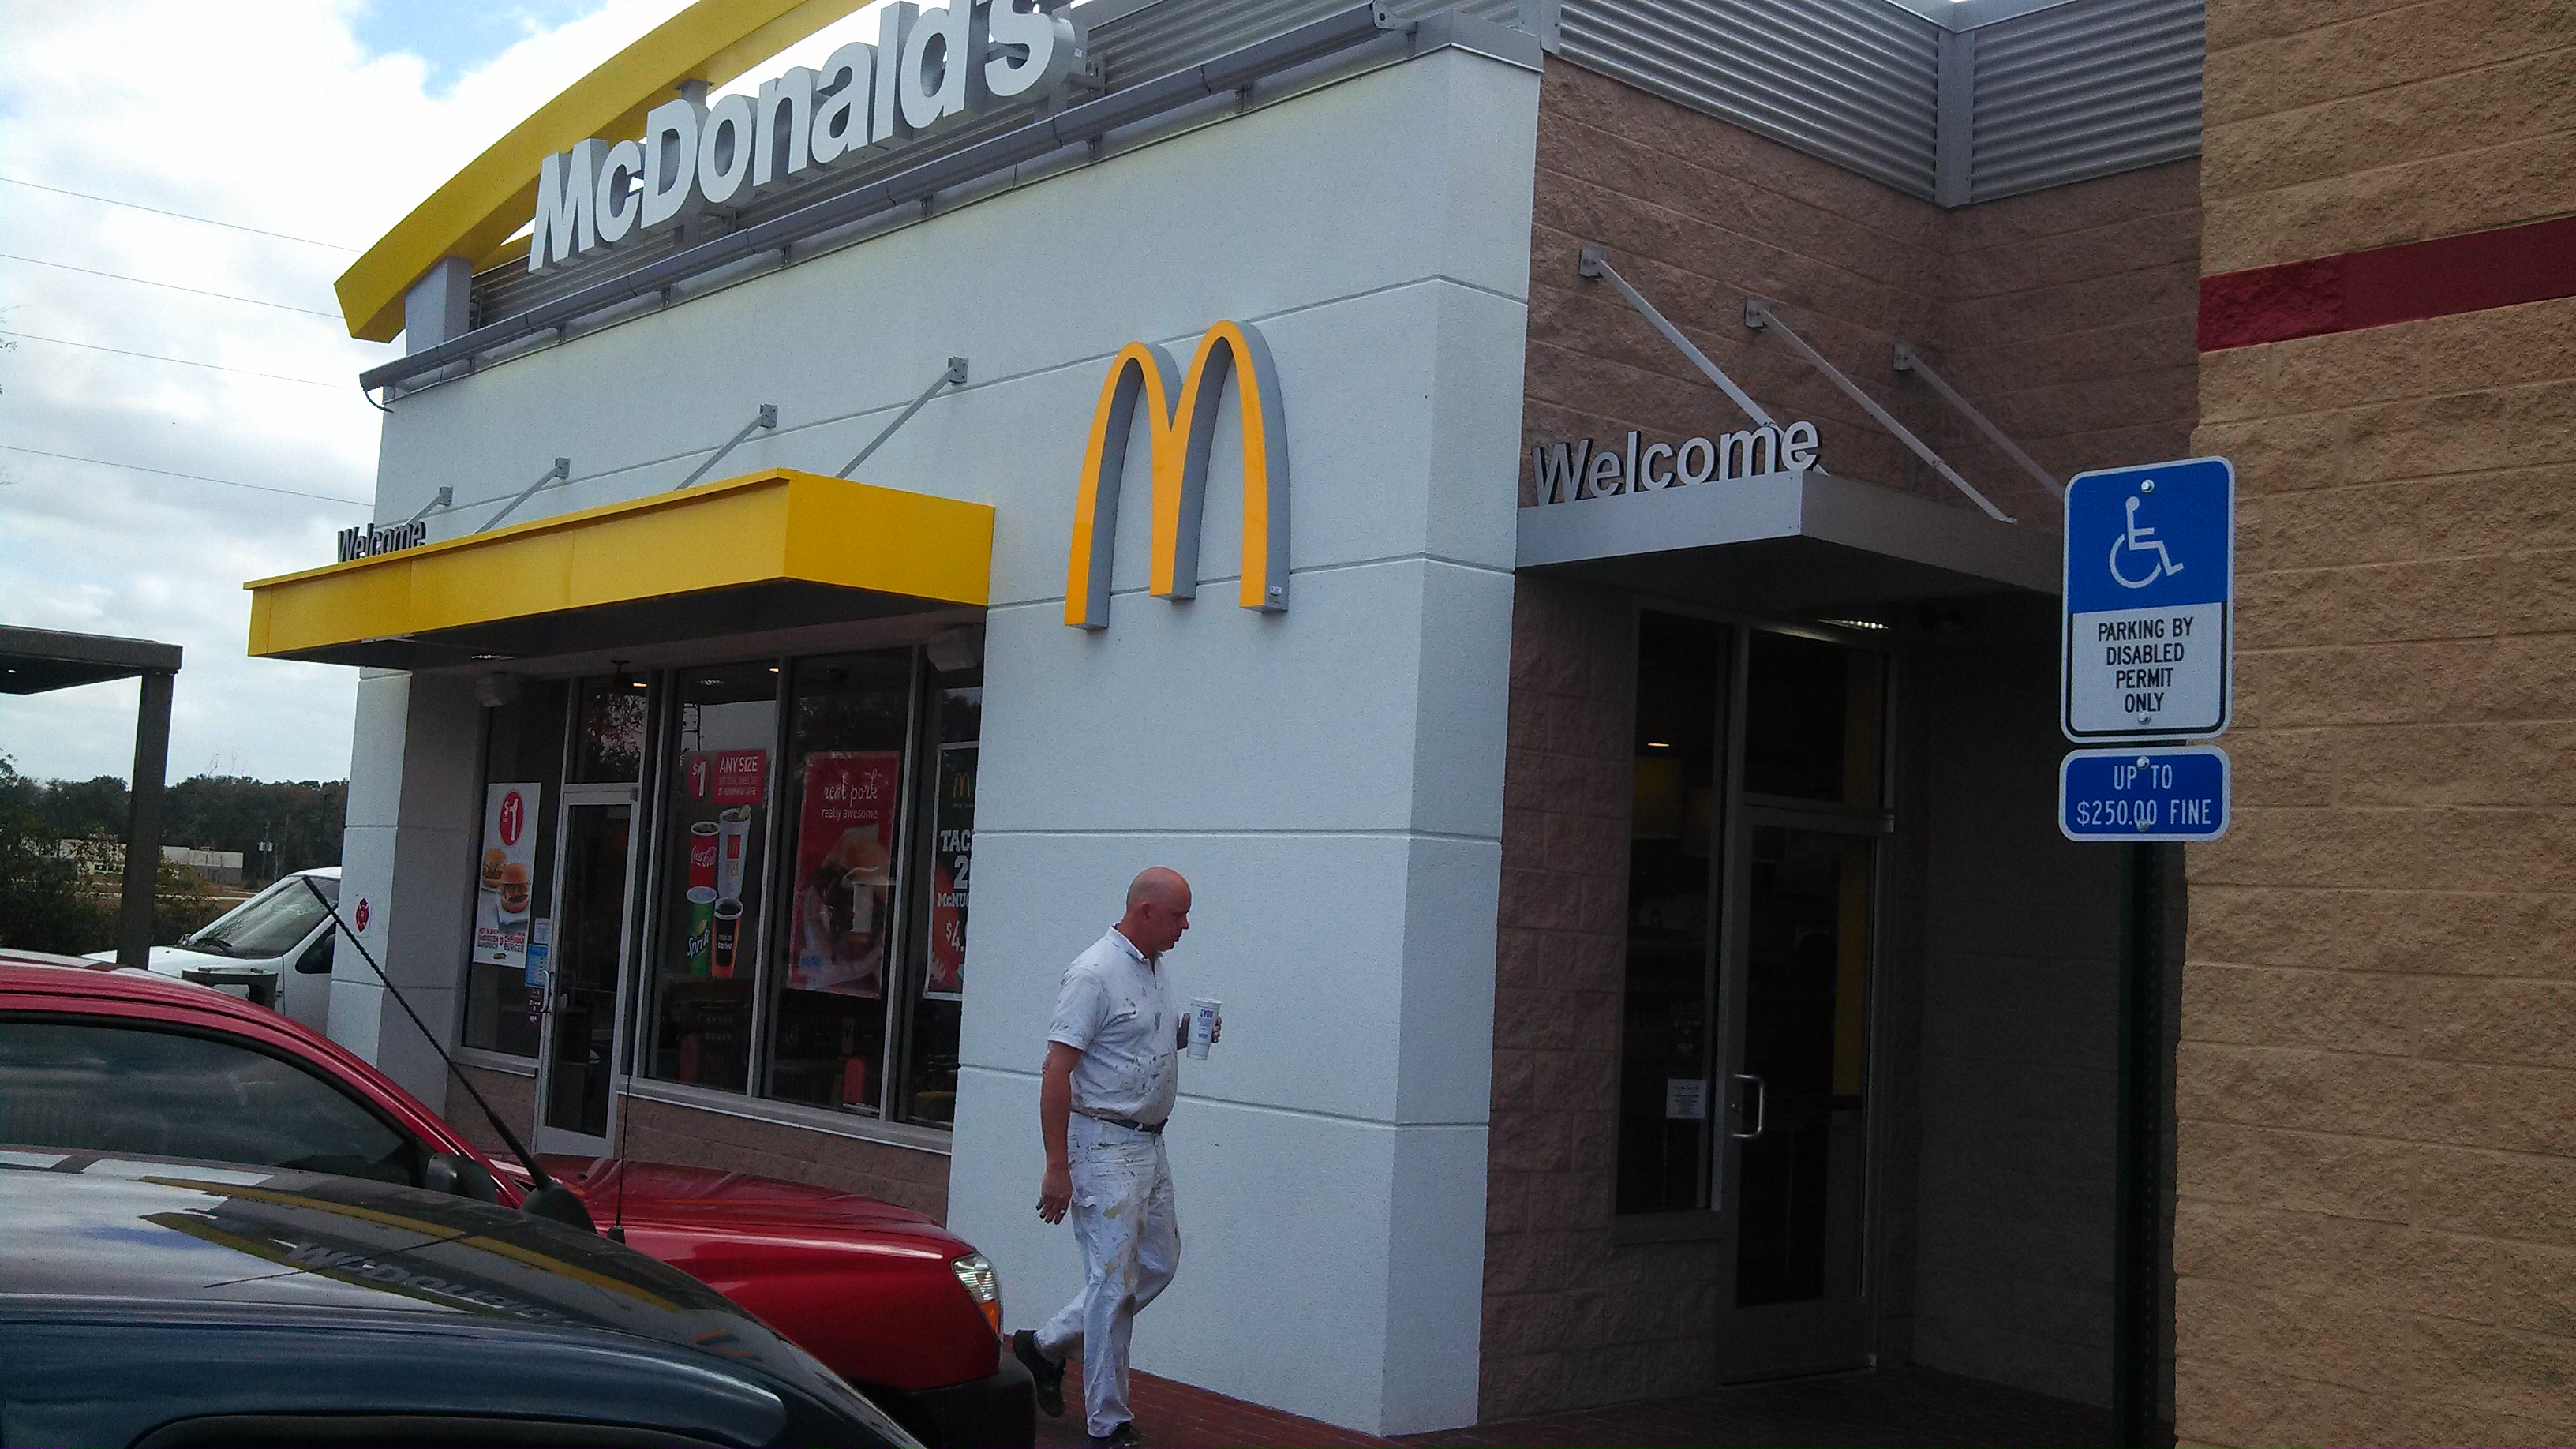 Completed McDonald\'s in Branford FL. Preferred Painters was the painting contractor to paint the interior and exterior of the restaurant and the adjacent department store as well.